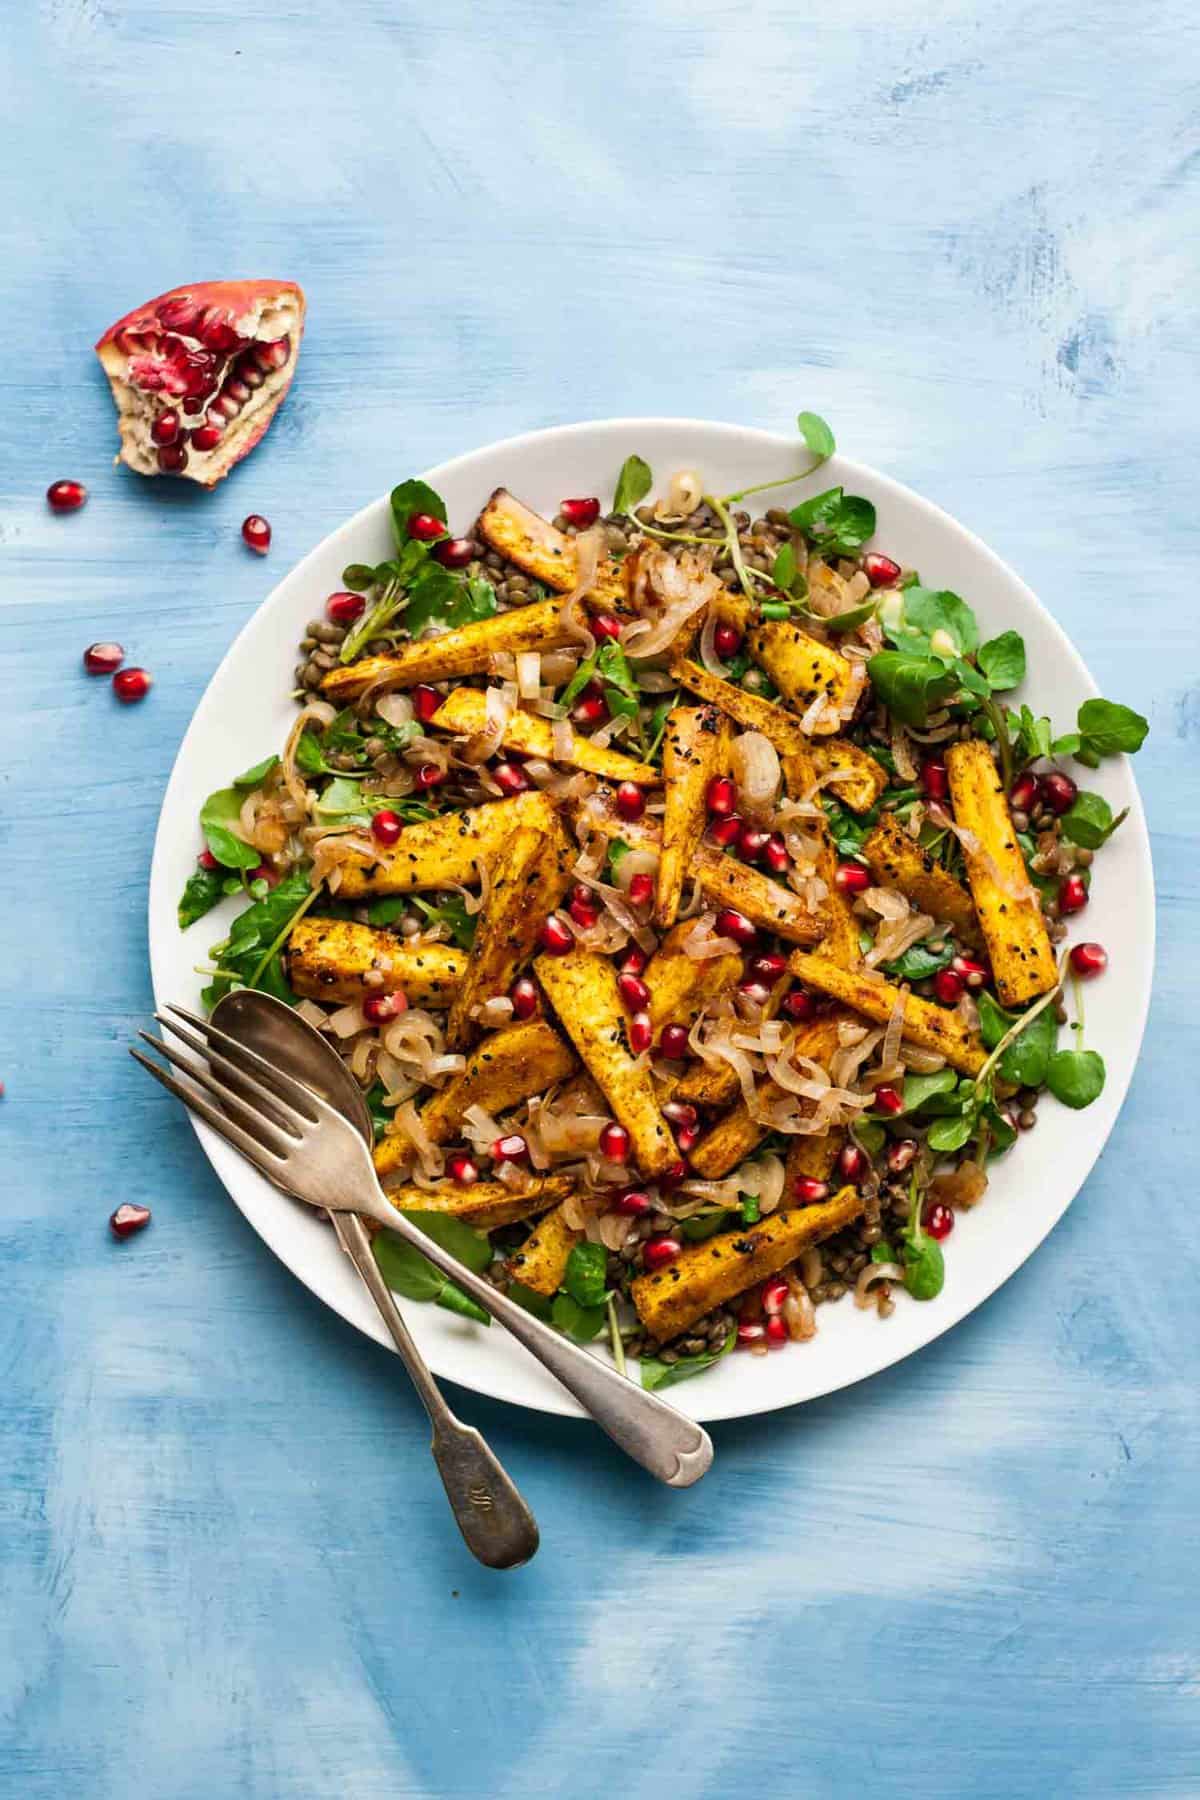 Indian-Spiced Parsnip & Lentil Salad - a warmly spiced and nourishing salad, perfect for chilly days when you're craving something lighter yet still satisfying | eatloveeats.com